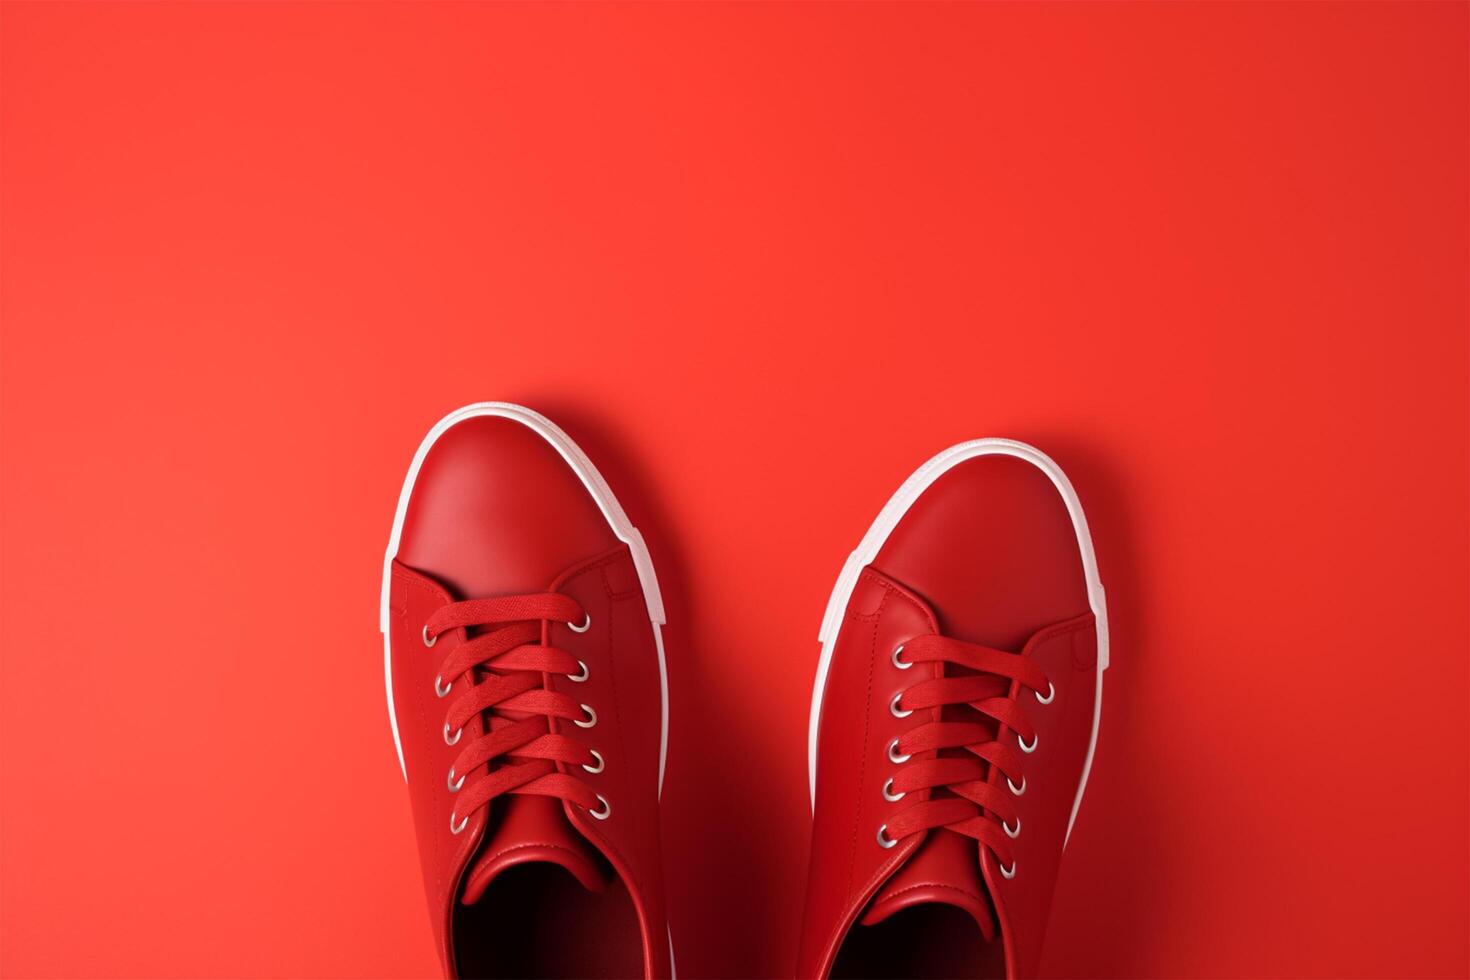 Pair of new stylish red sneakers on red background. International Red Sneakers Day. photo